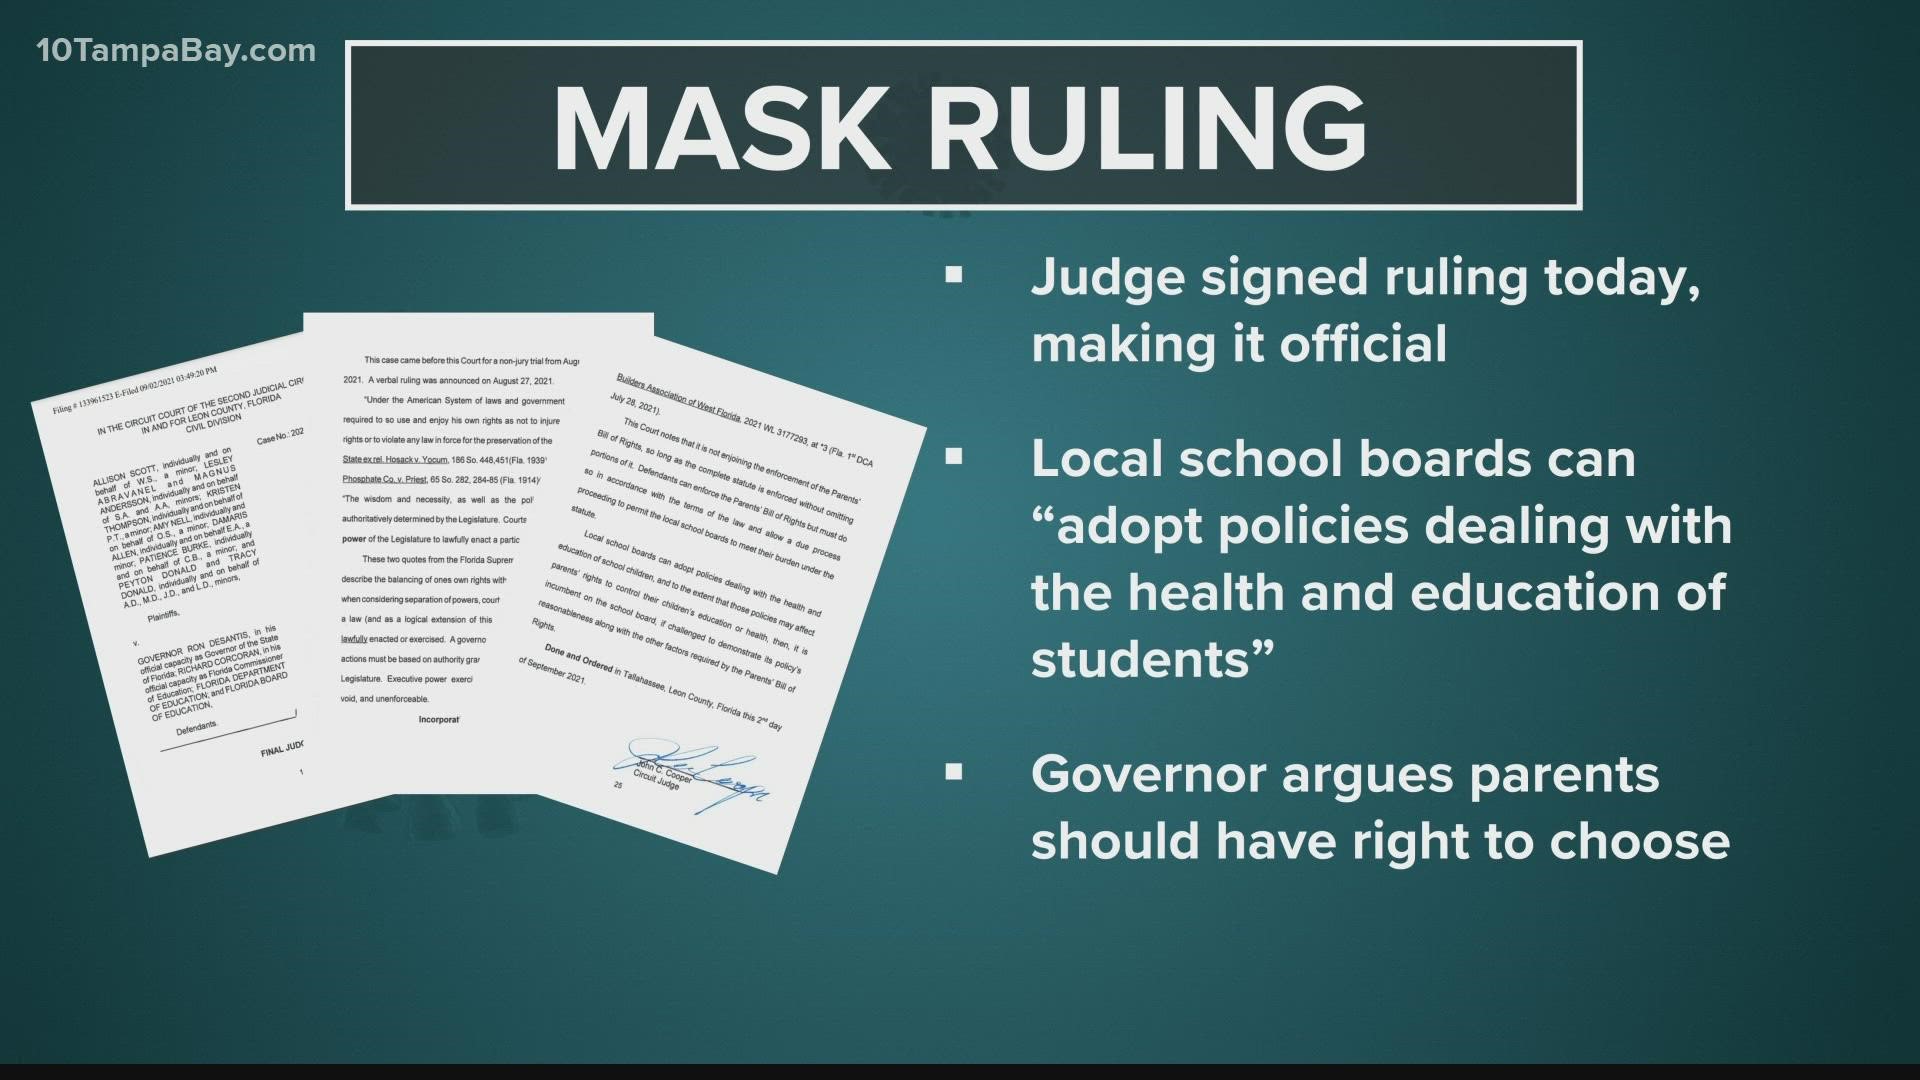 The judge's decision essentially gave Florida’s 67 school boards the power to impose a student mask mandate.